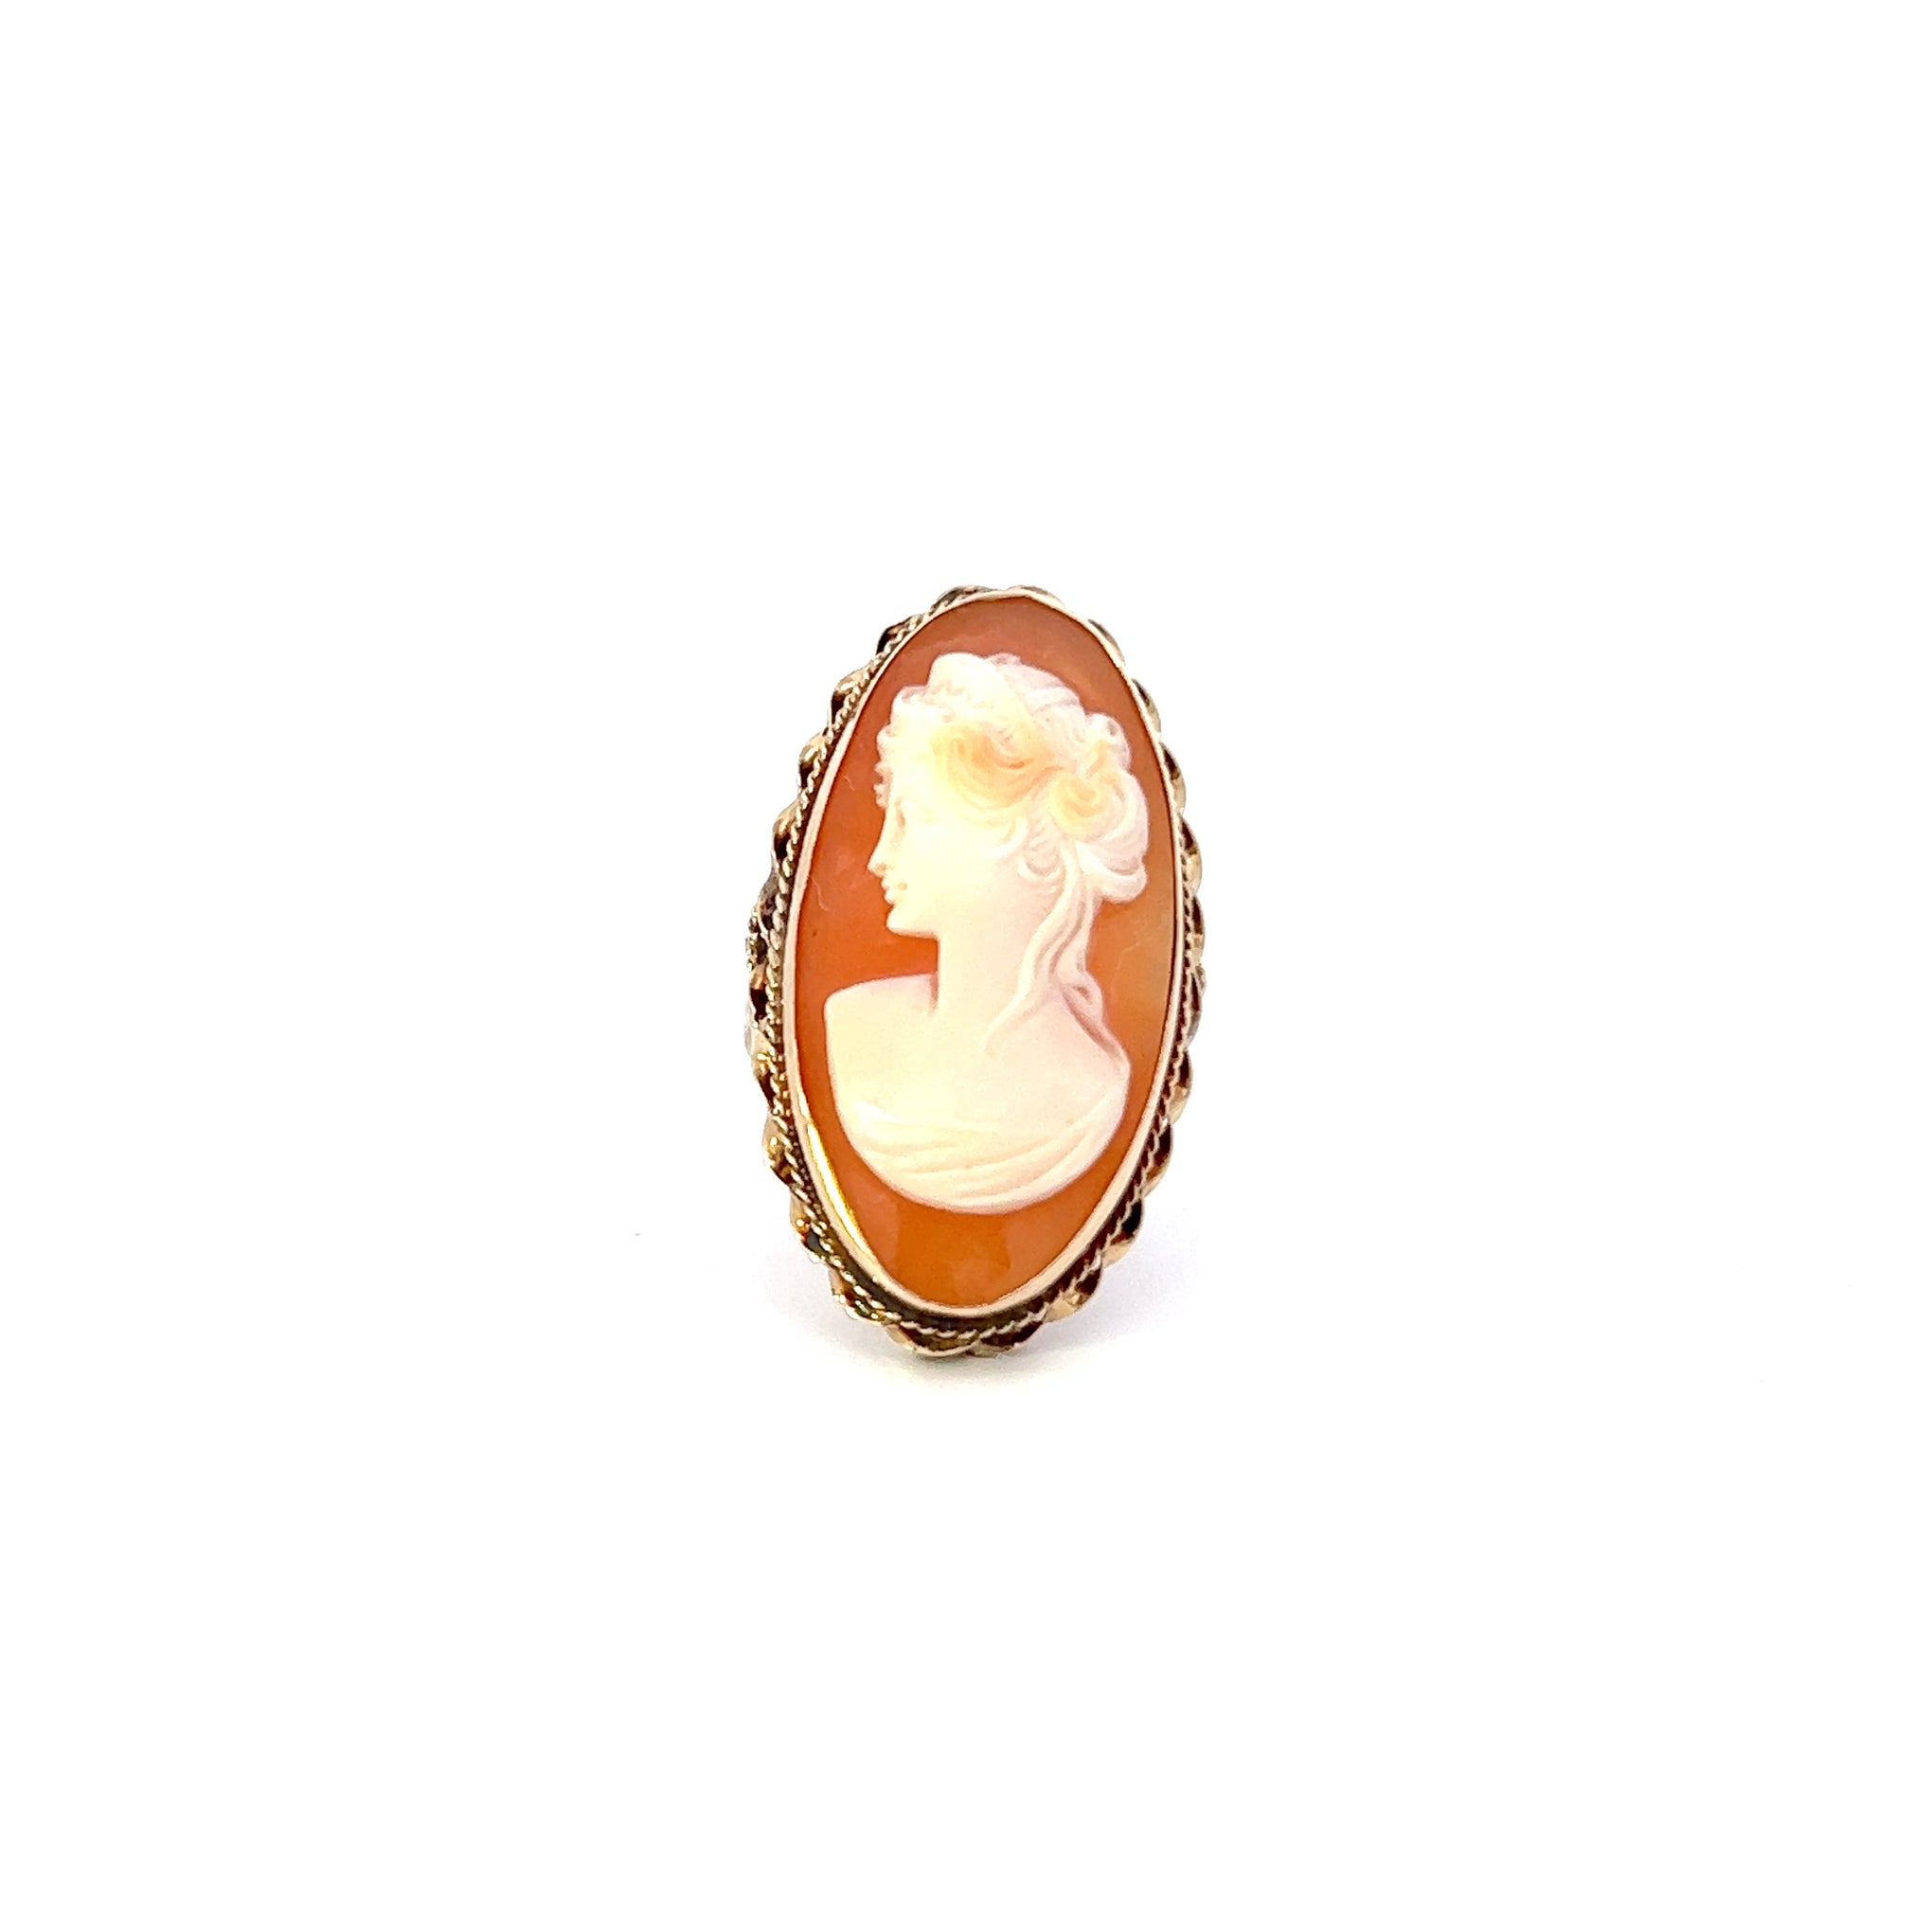 Vintage 14KT Yellow Gold Oval Cameo Ring